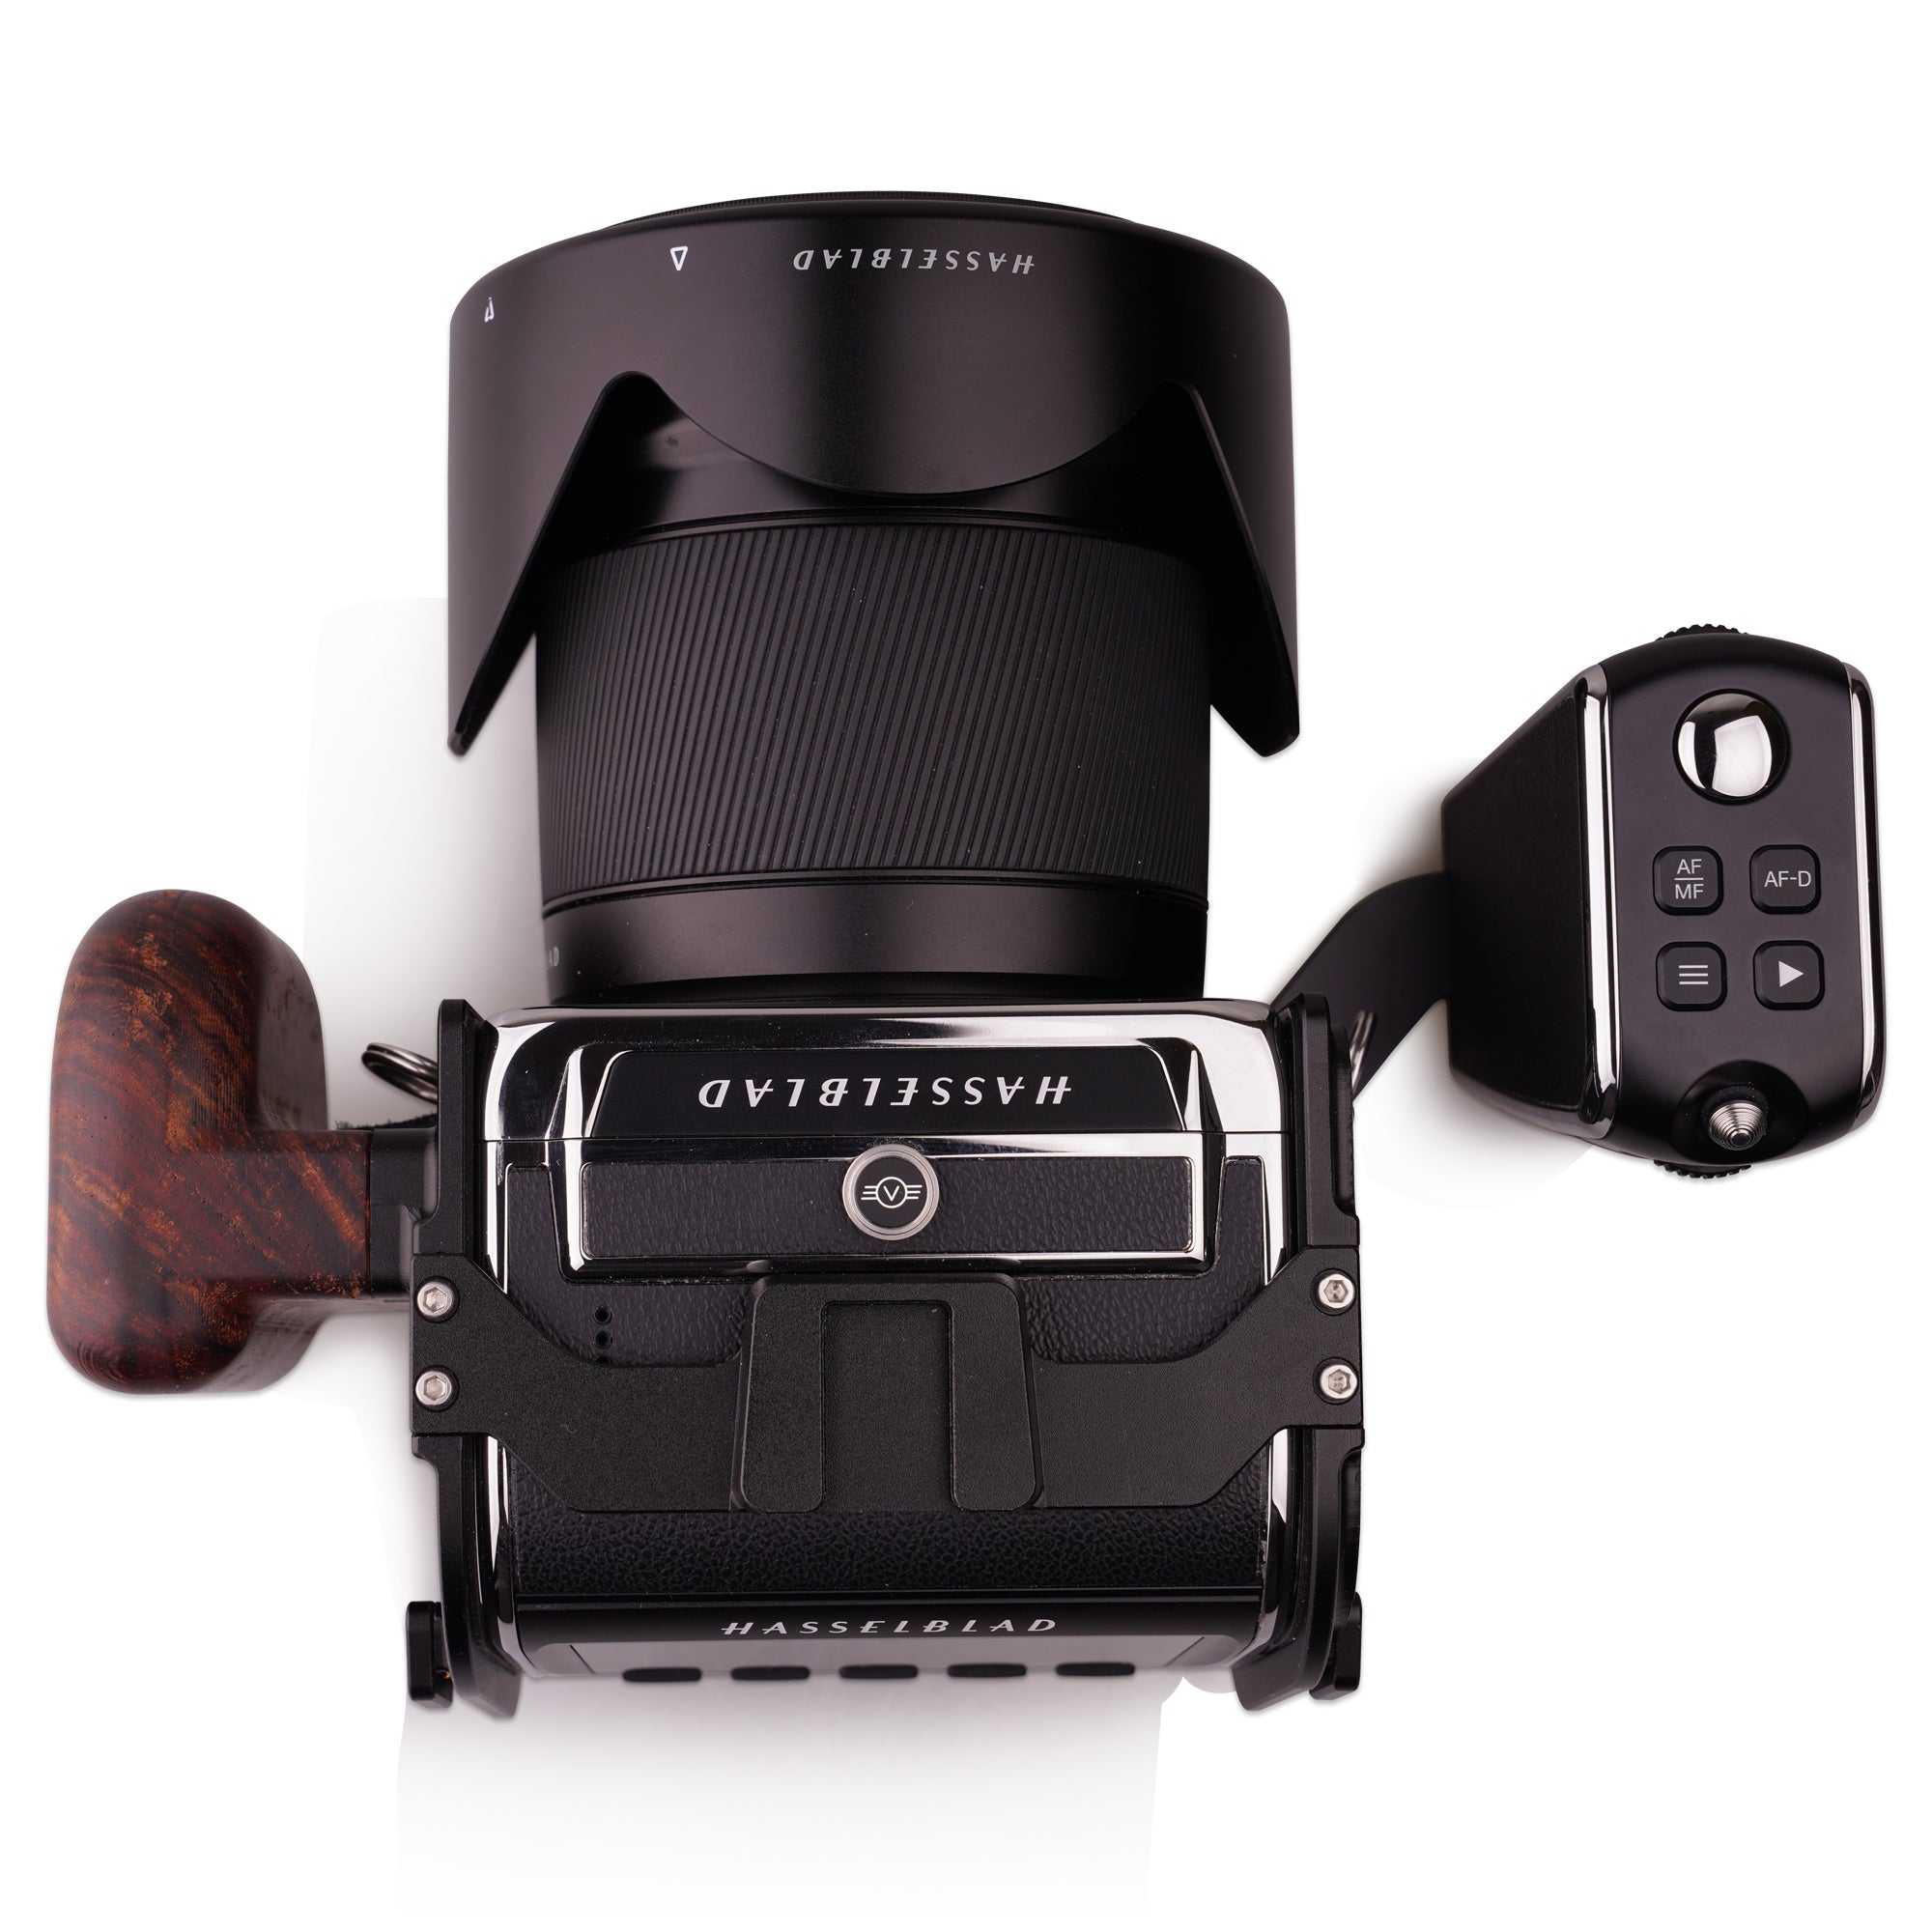 Lanhorse Camera Cage for Hasselblad 907x and Control Grip, Build-in Rosewood Hand Grip. 2nd Generation.